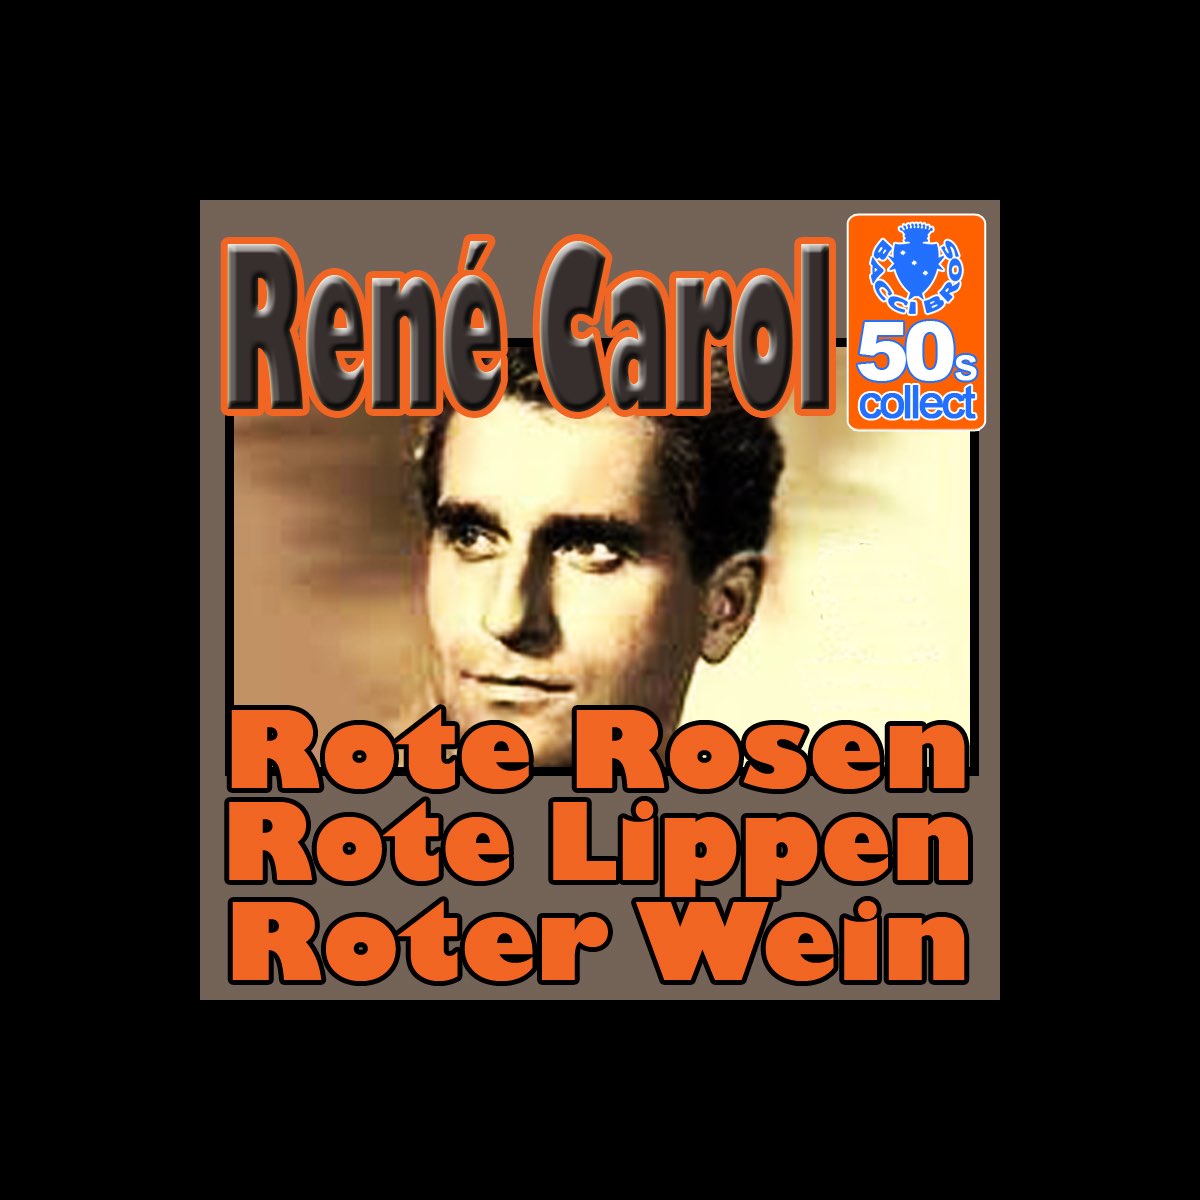 Rote Rosen, rote Lippen, roter Wein (Digitally Remastered) - Single by René  Carol on Apple Music